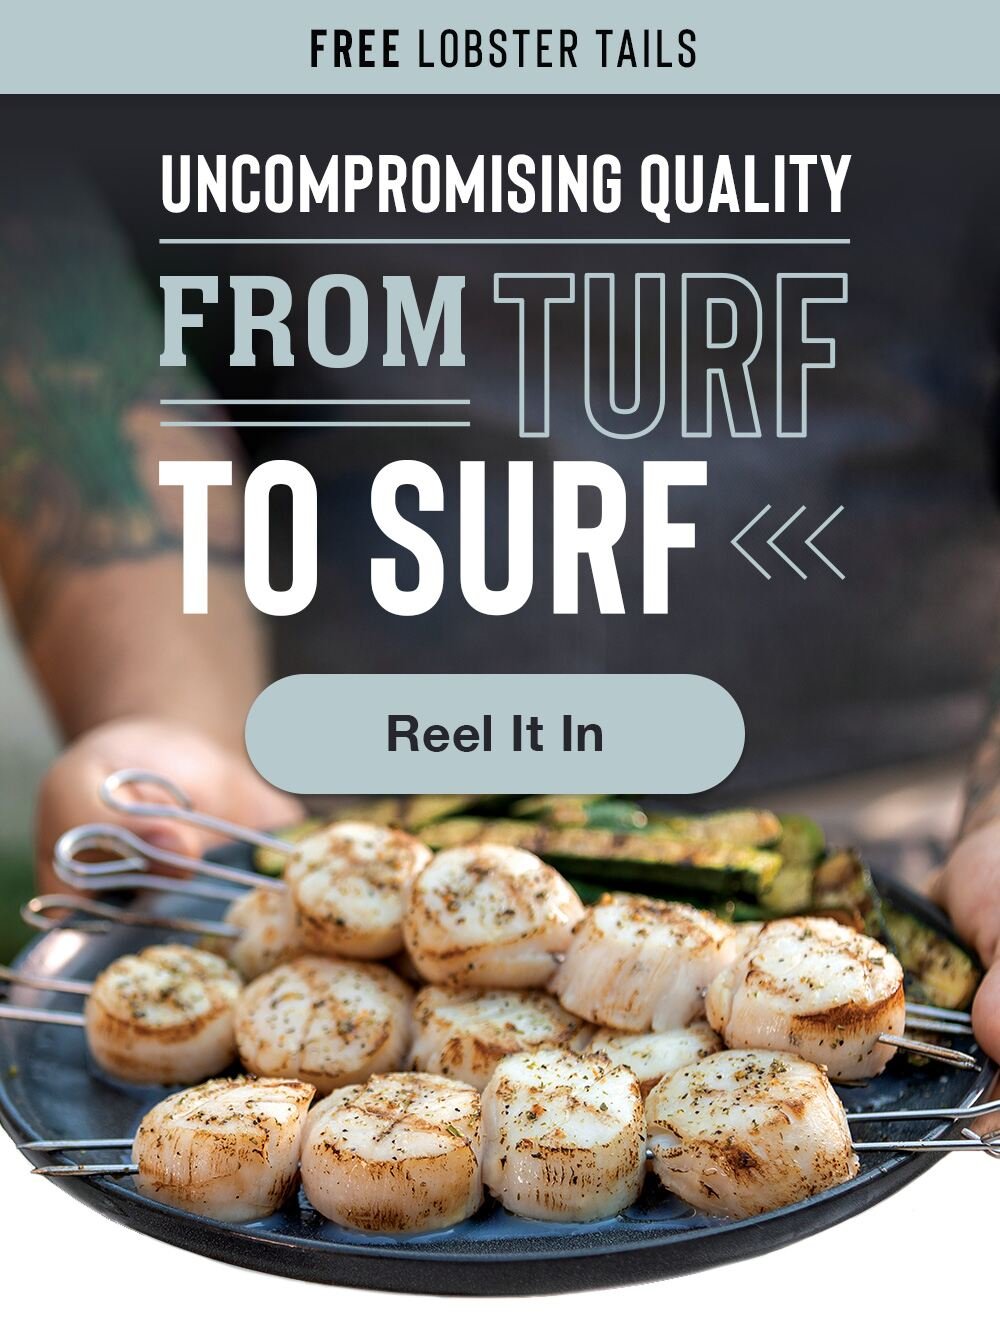 Free Lobster Tails | Uncompromising Quality from Turf to Surf || Reel it in